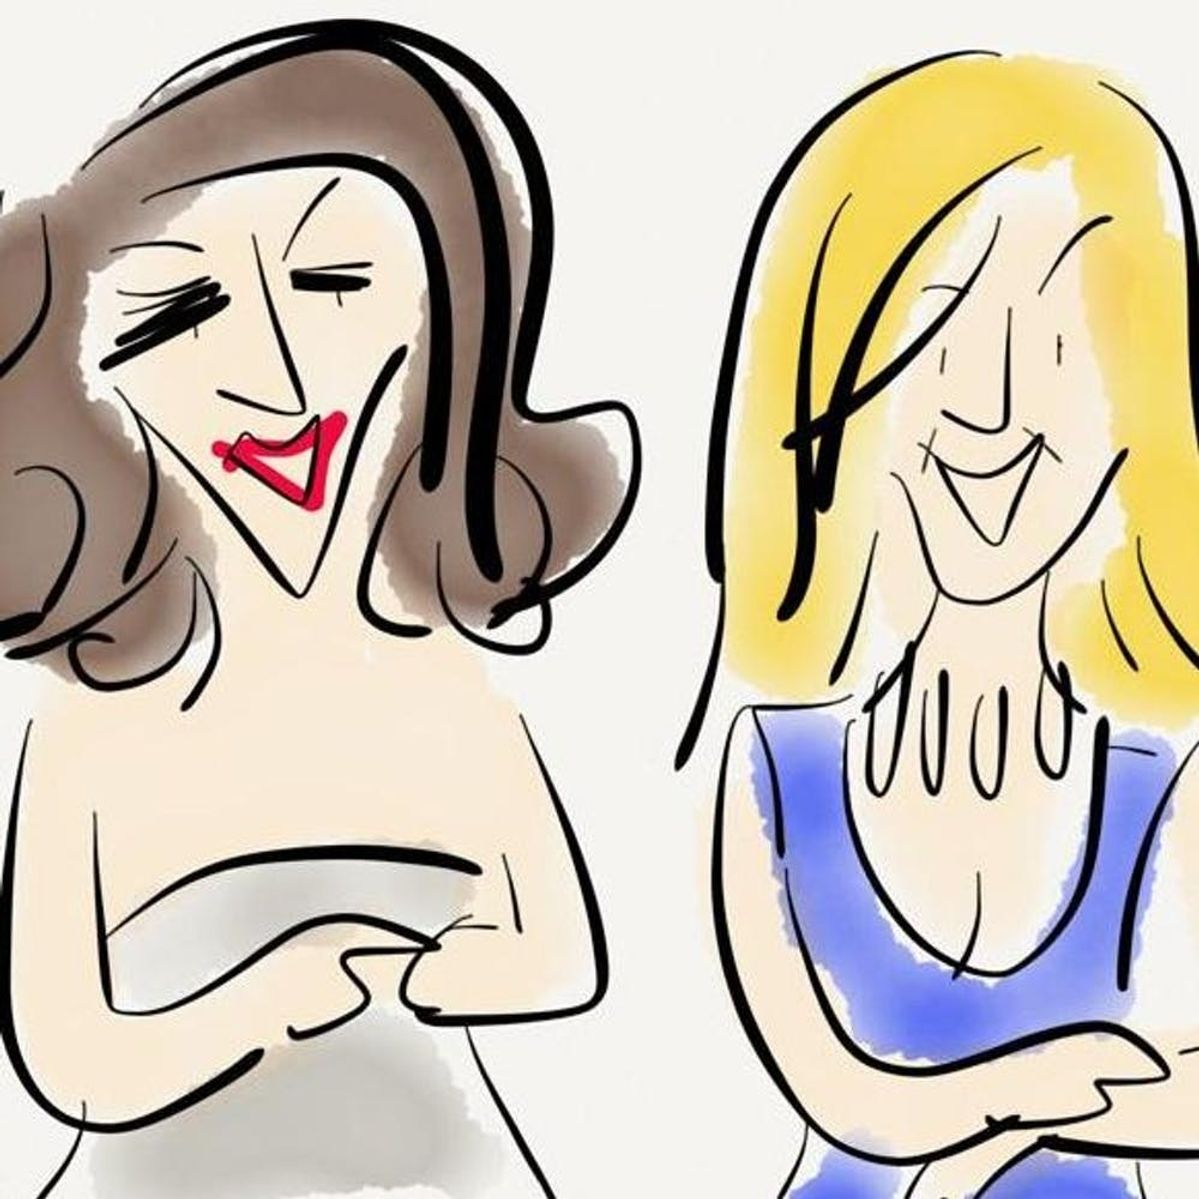 Our Fave New Way to Watch Awards Shows? Live Sketching.